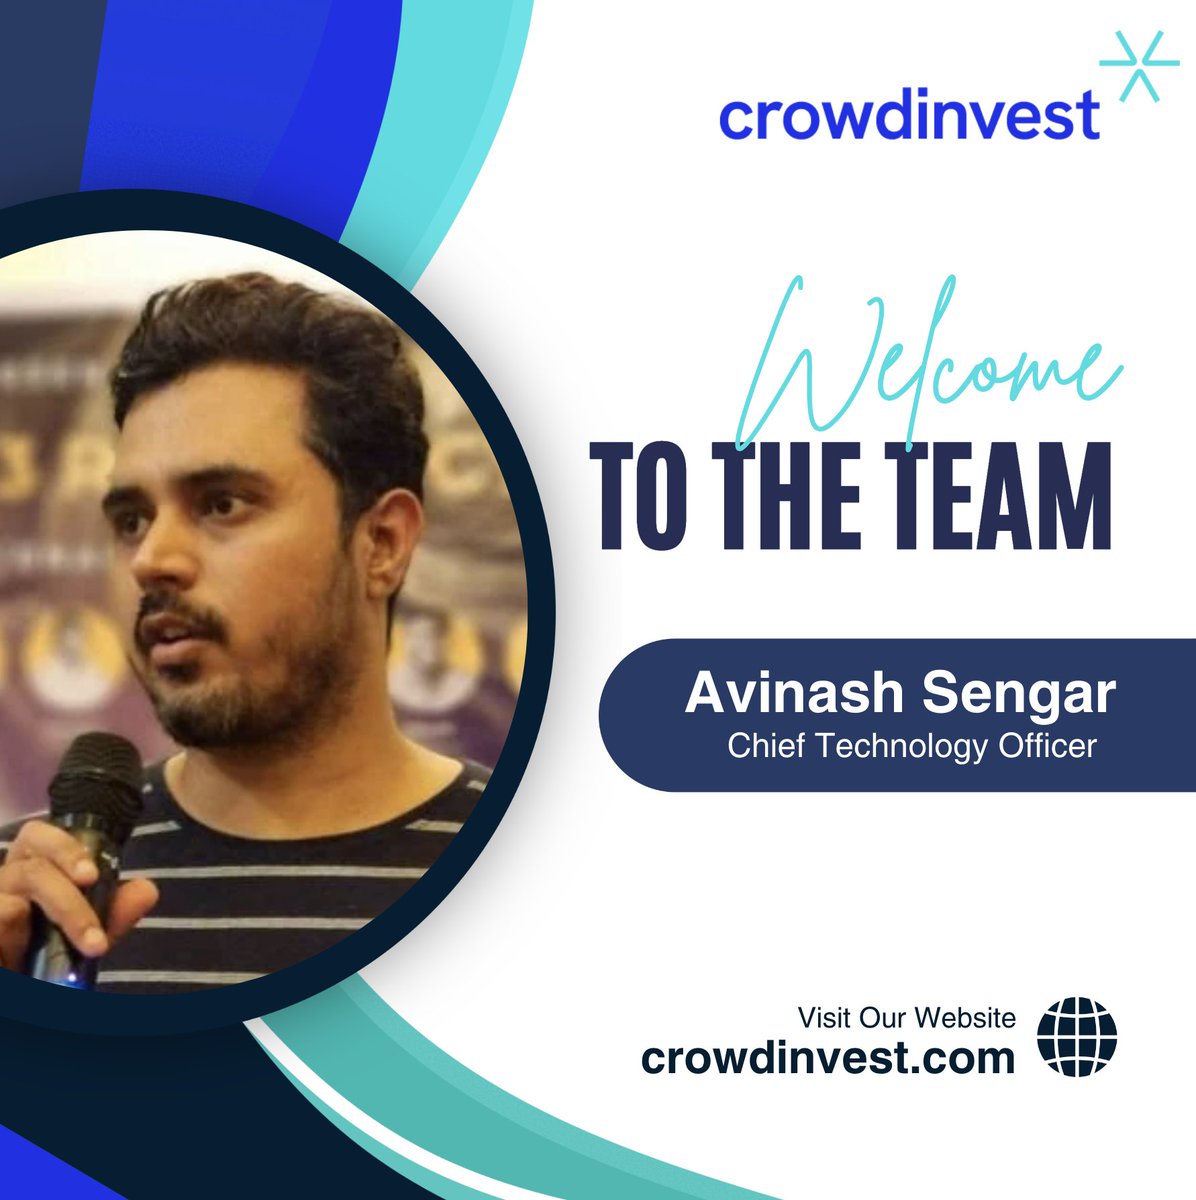 Say hello to our newest team member, @avinash975, who is coming on board as our Chief Technology Officer. He has 14+ yrs of experience in #tech & specialises in #blockchain, #tokenisation, #fintech, & cross-border transactions. We look forward to disrupting the market together!